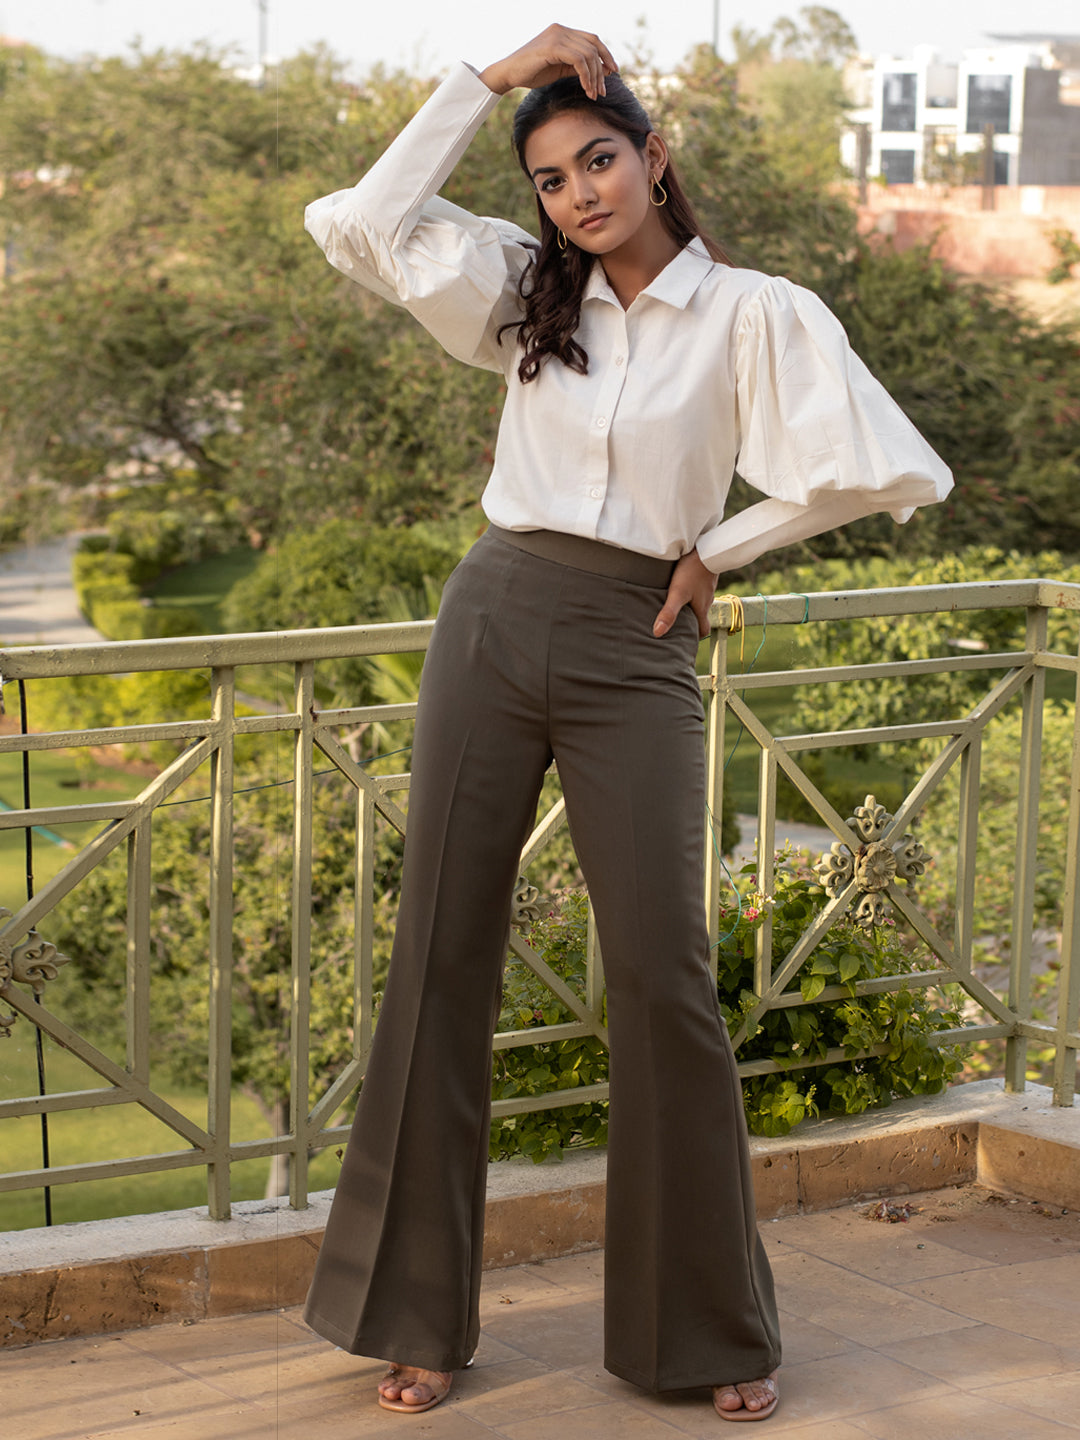 White Shirt with Beige High Waisted Trousers